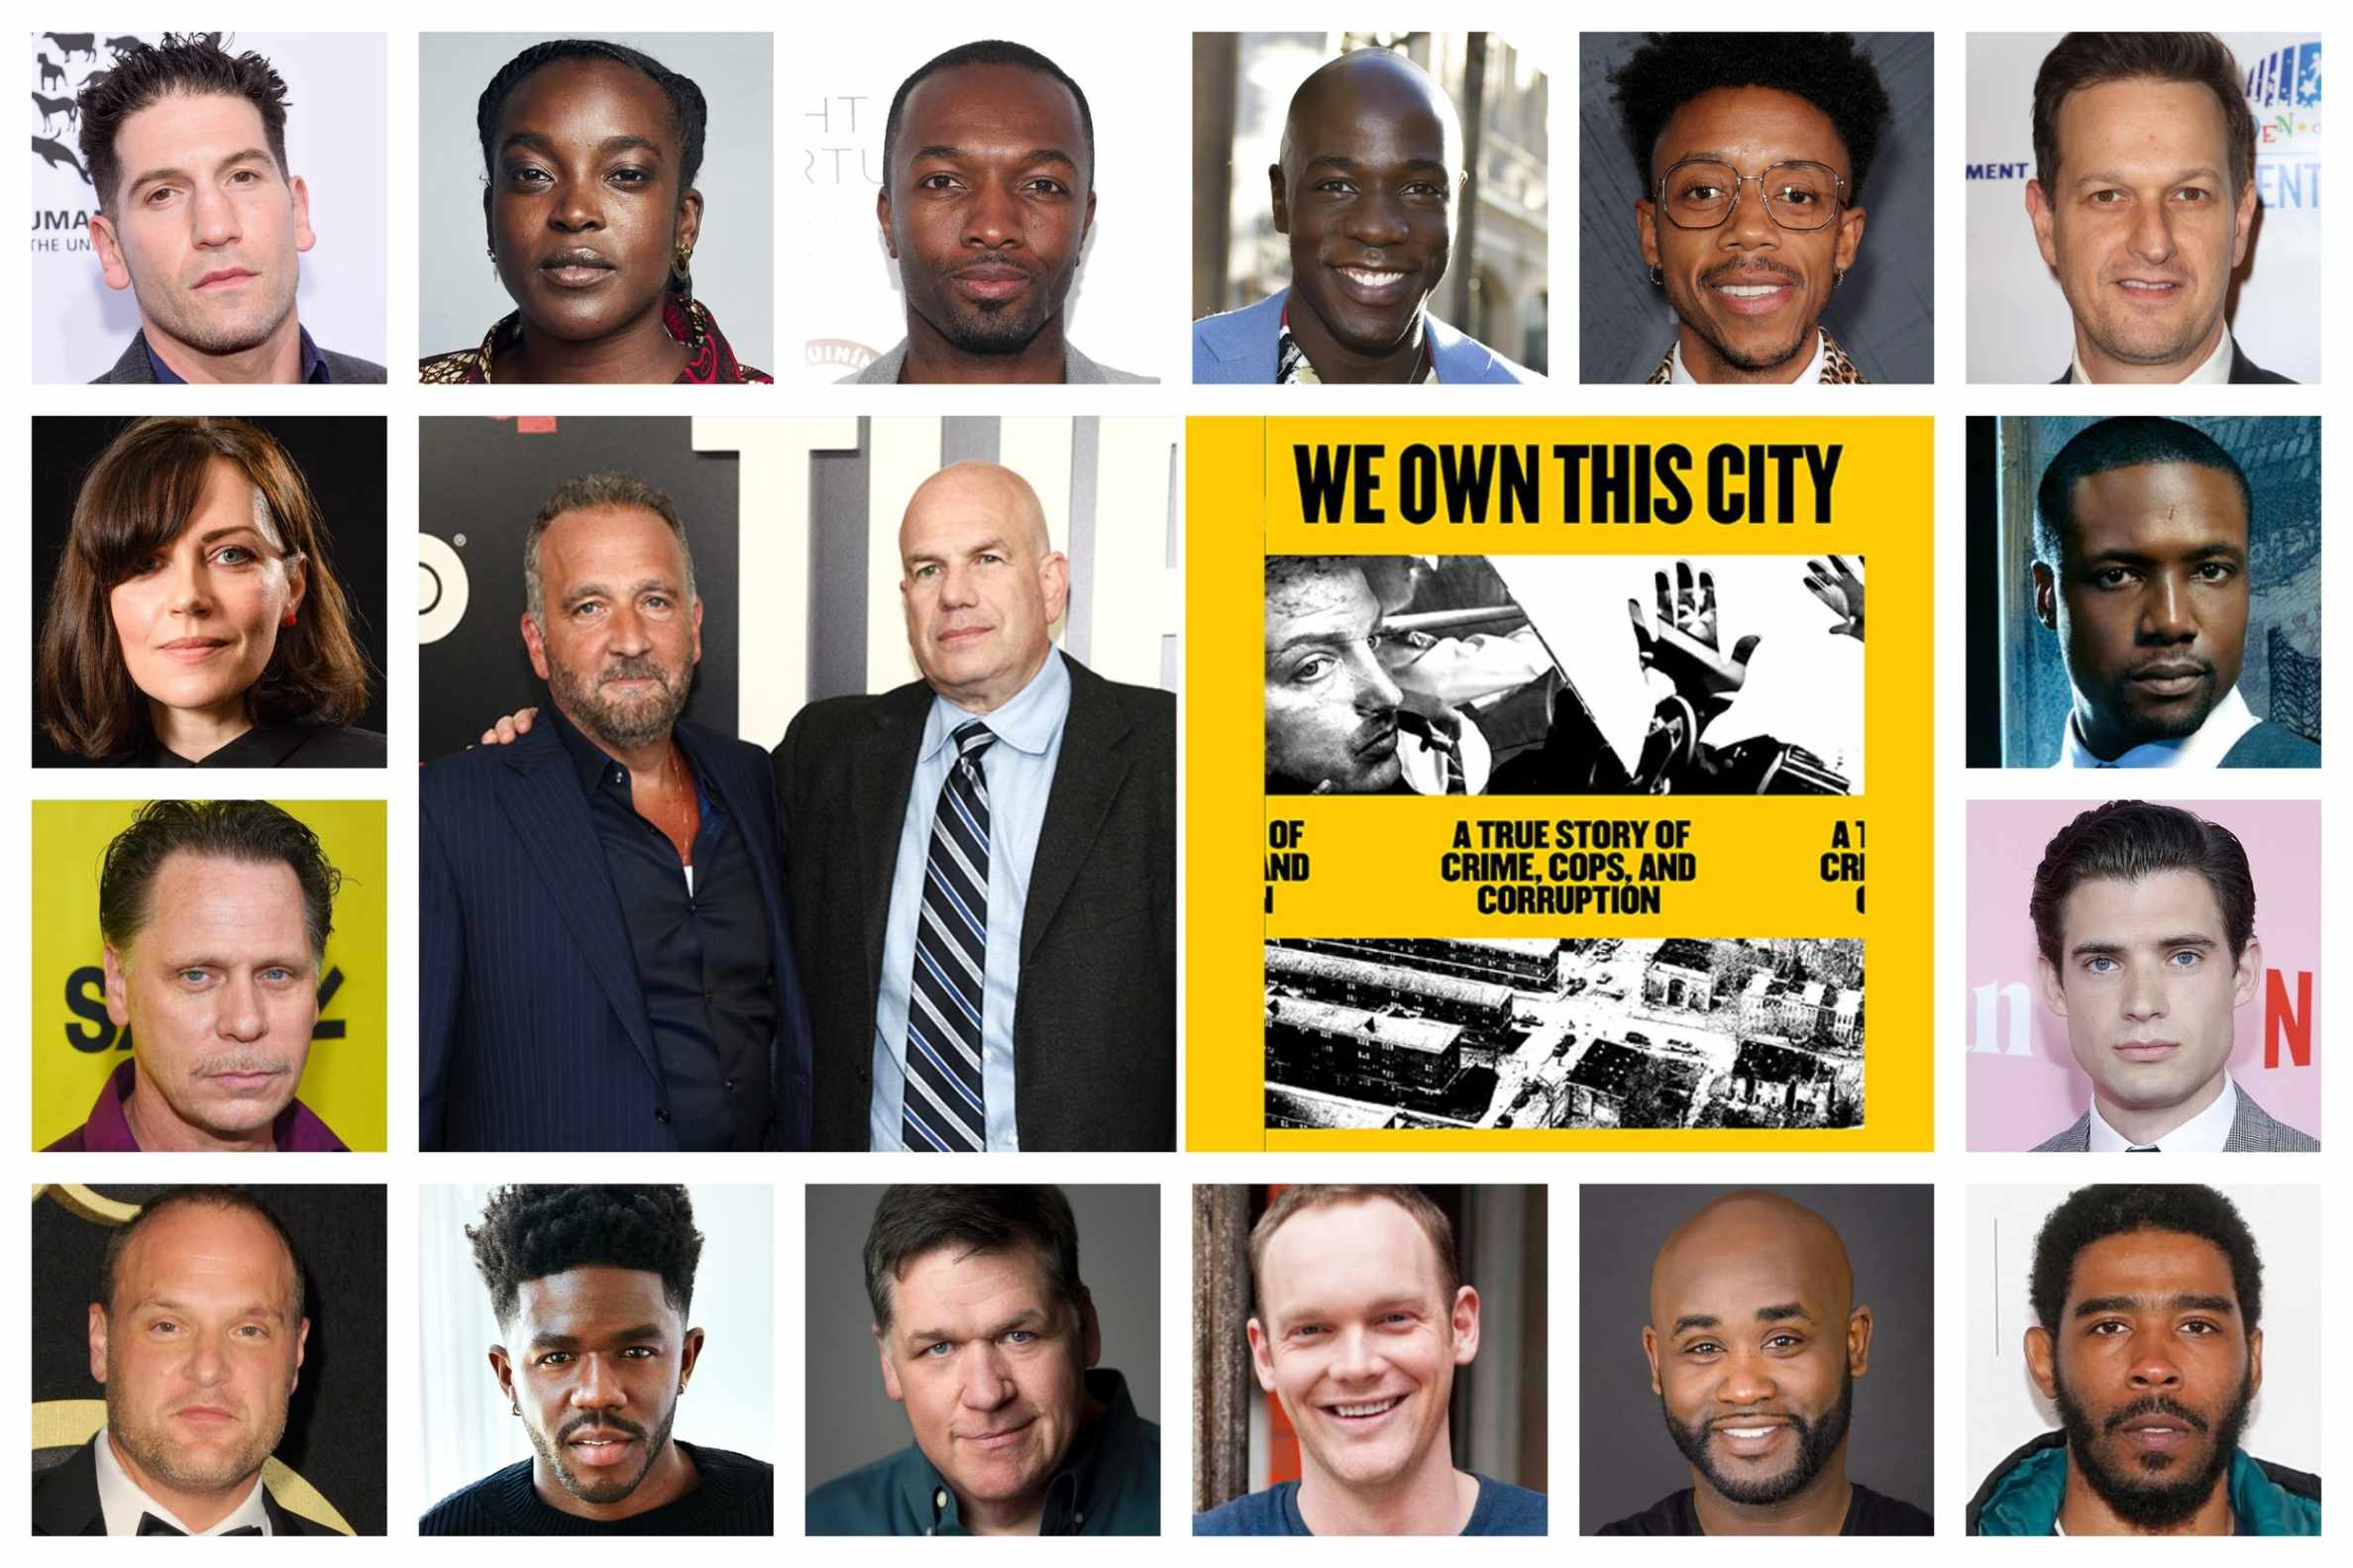 The team members of We Own This City